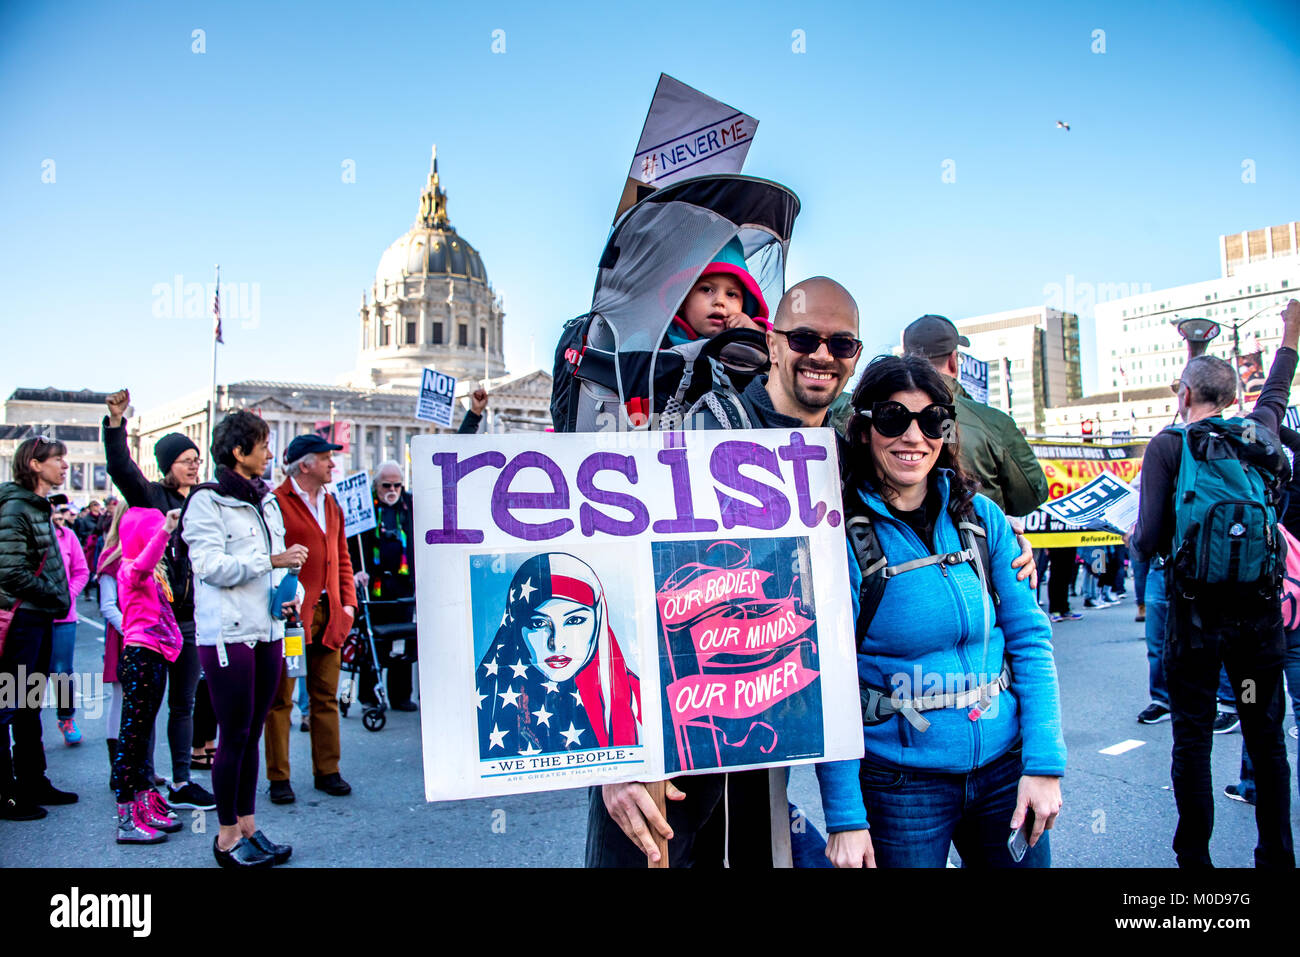 San Francisco, California, USA. 20th January, 2018. The 2018 Women's March in San Francisco, organized by Women's March Bay Area. A family prepares to march, mom and dad with baby on back in a child carrier backpack with its own sign reading #neverme and the father holds a sign that reads 'resist,' which includes the 'Our bodies, our minds, our power' and 'We the people' signs made popular during the previous women's march. Stock Photo